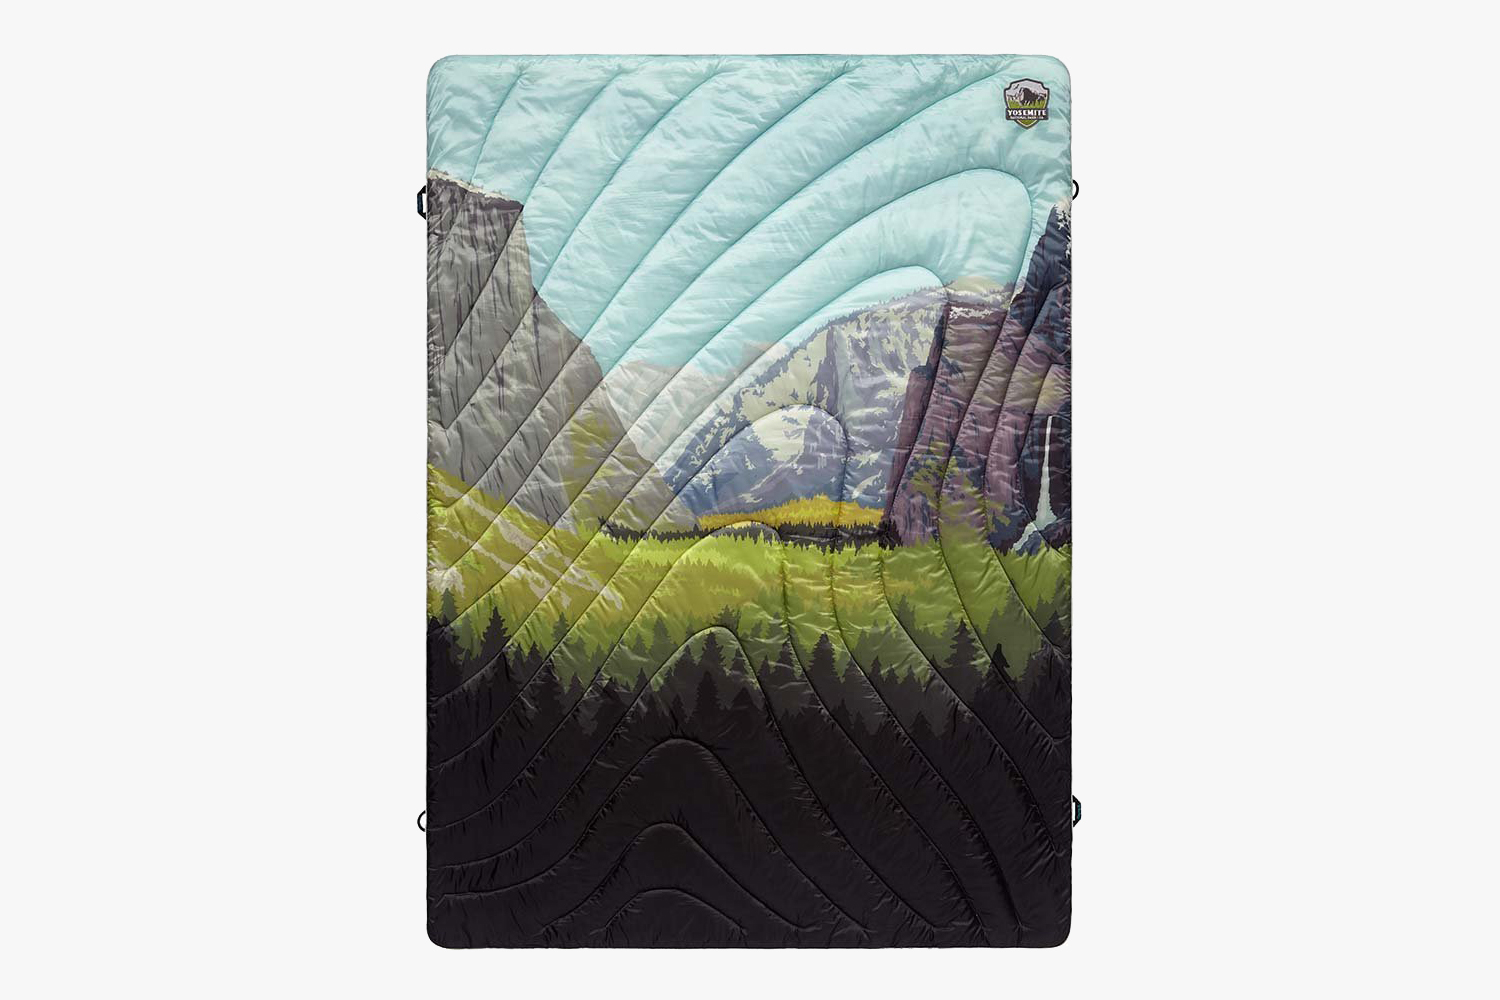 The Original Puffy Blanket Yosemite Edition Gets In-Touch With The Wild